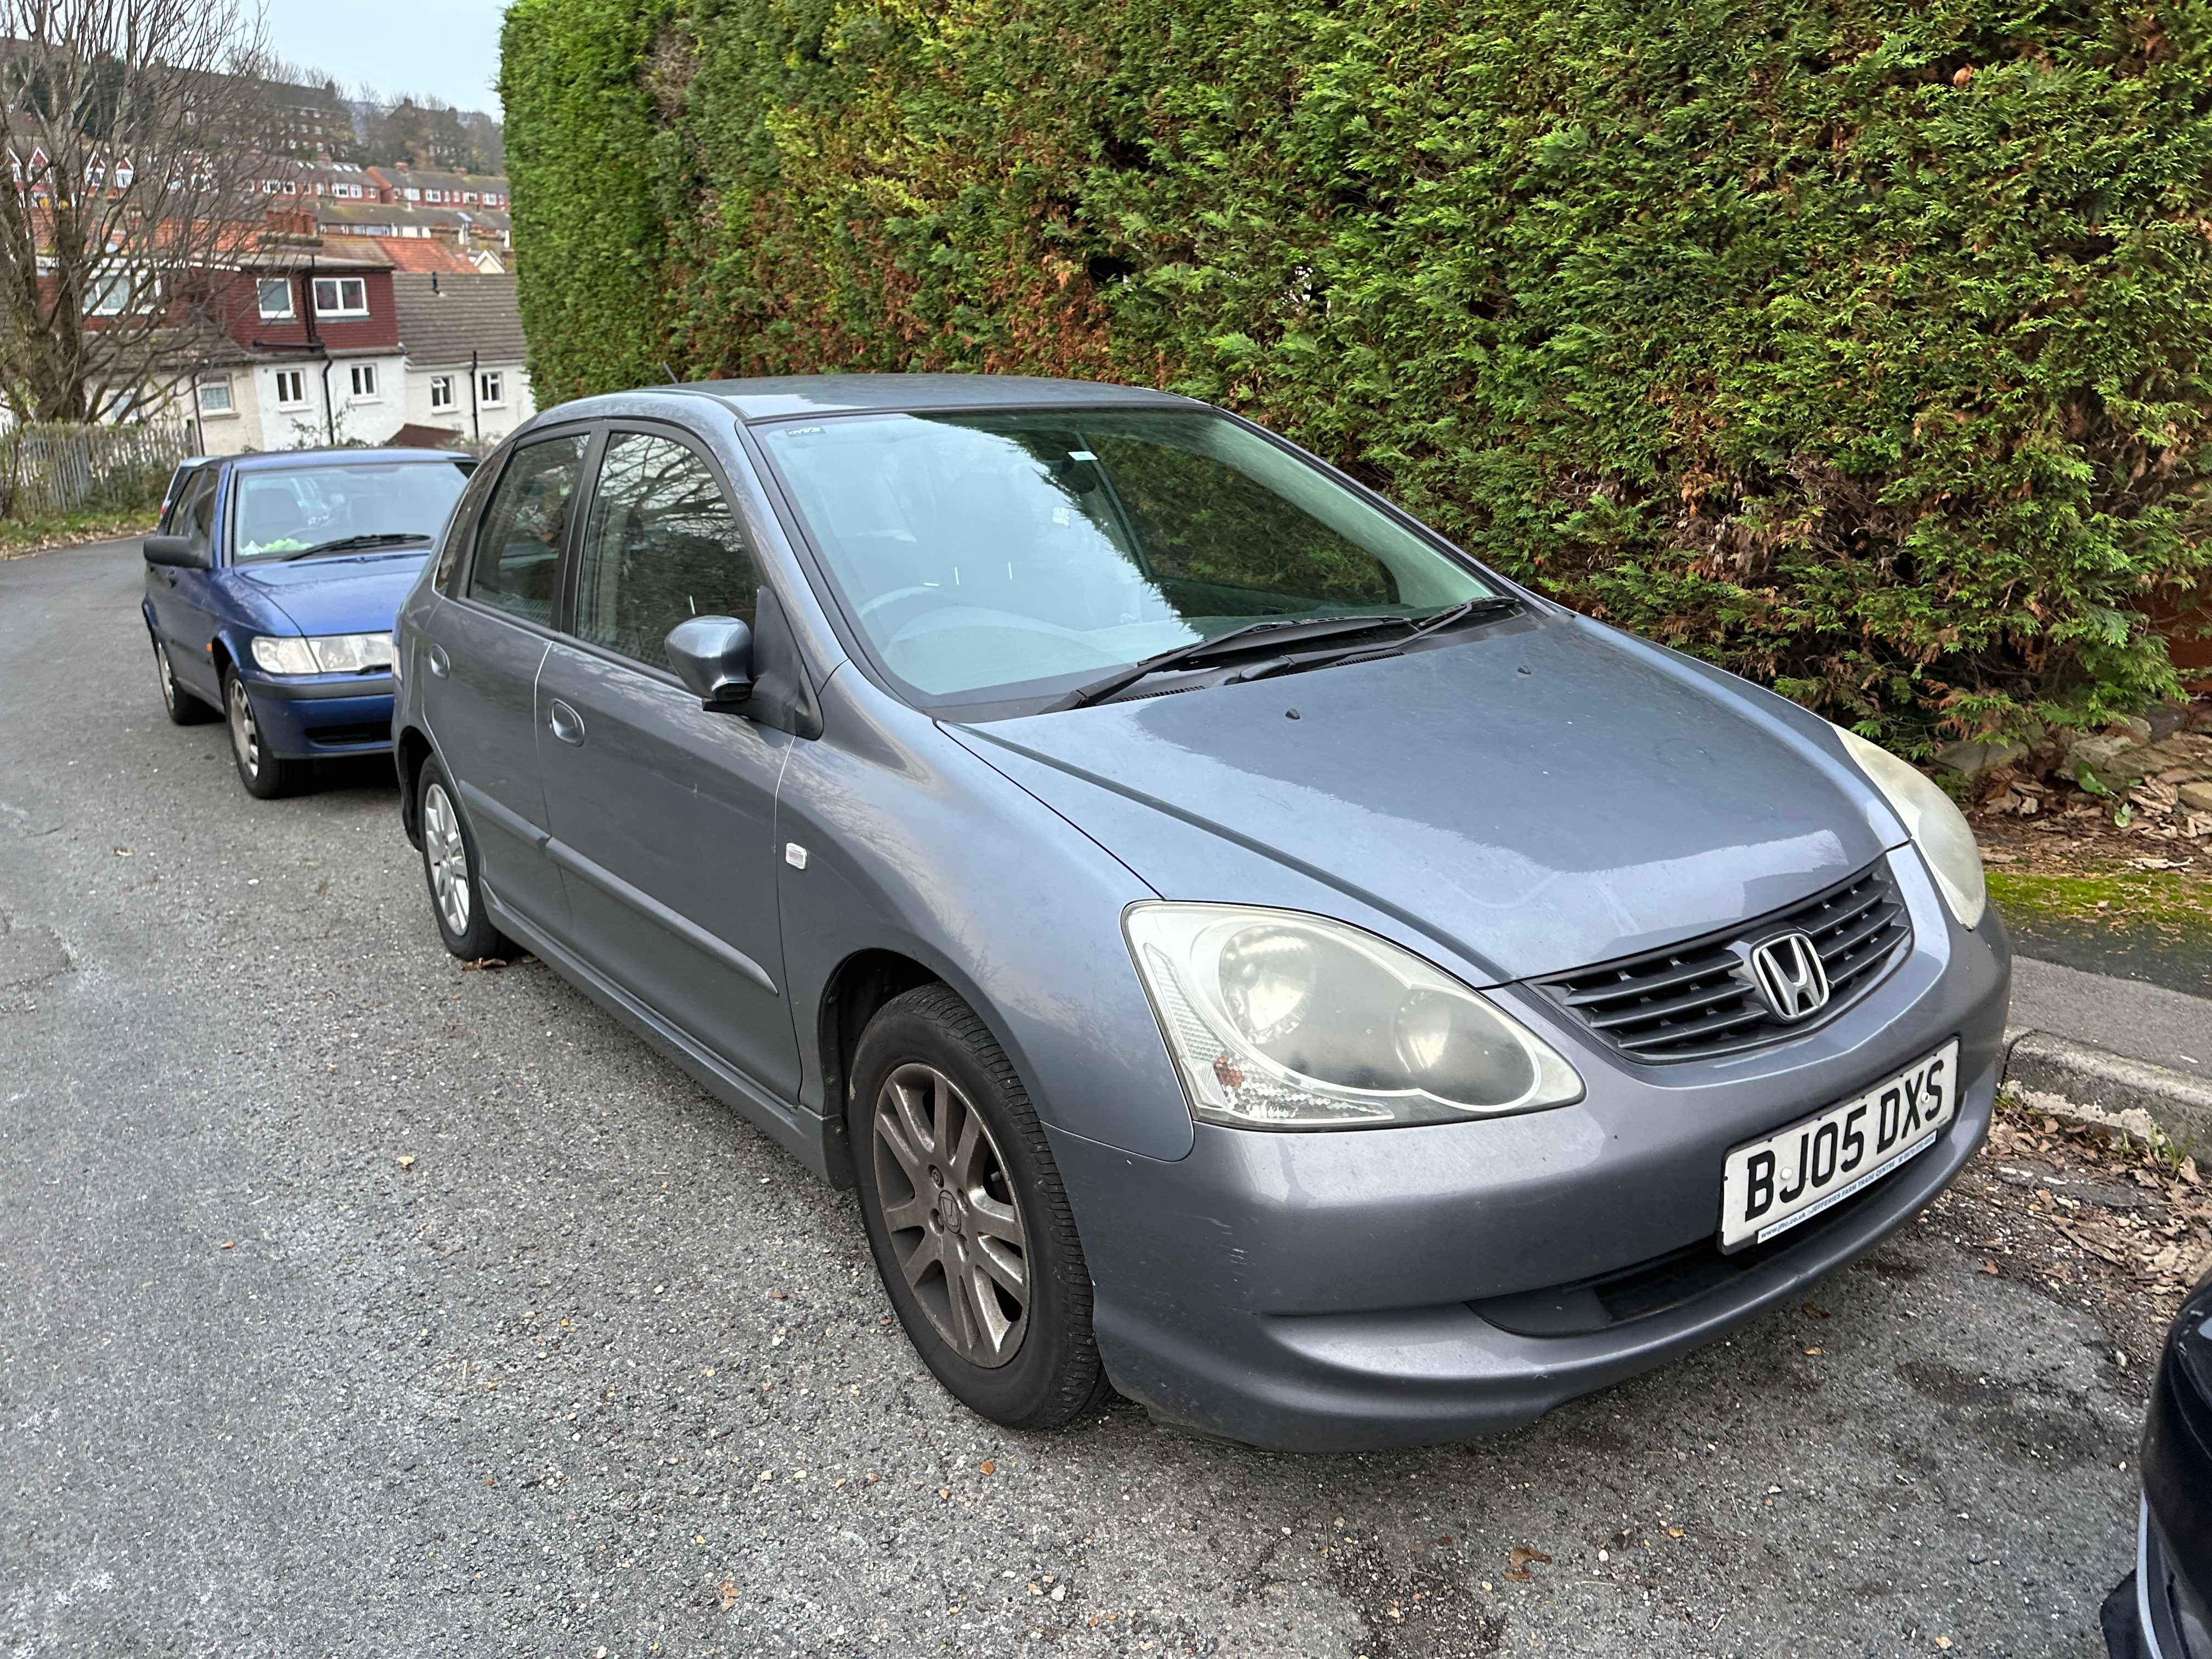 Photograph of BJ05 DXS - a Grey Honda Civic parked in Hollingdean by a non-resident. The first of two photographs supplied by the residents of Hollingdean.